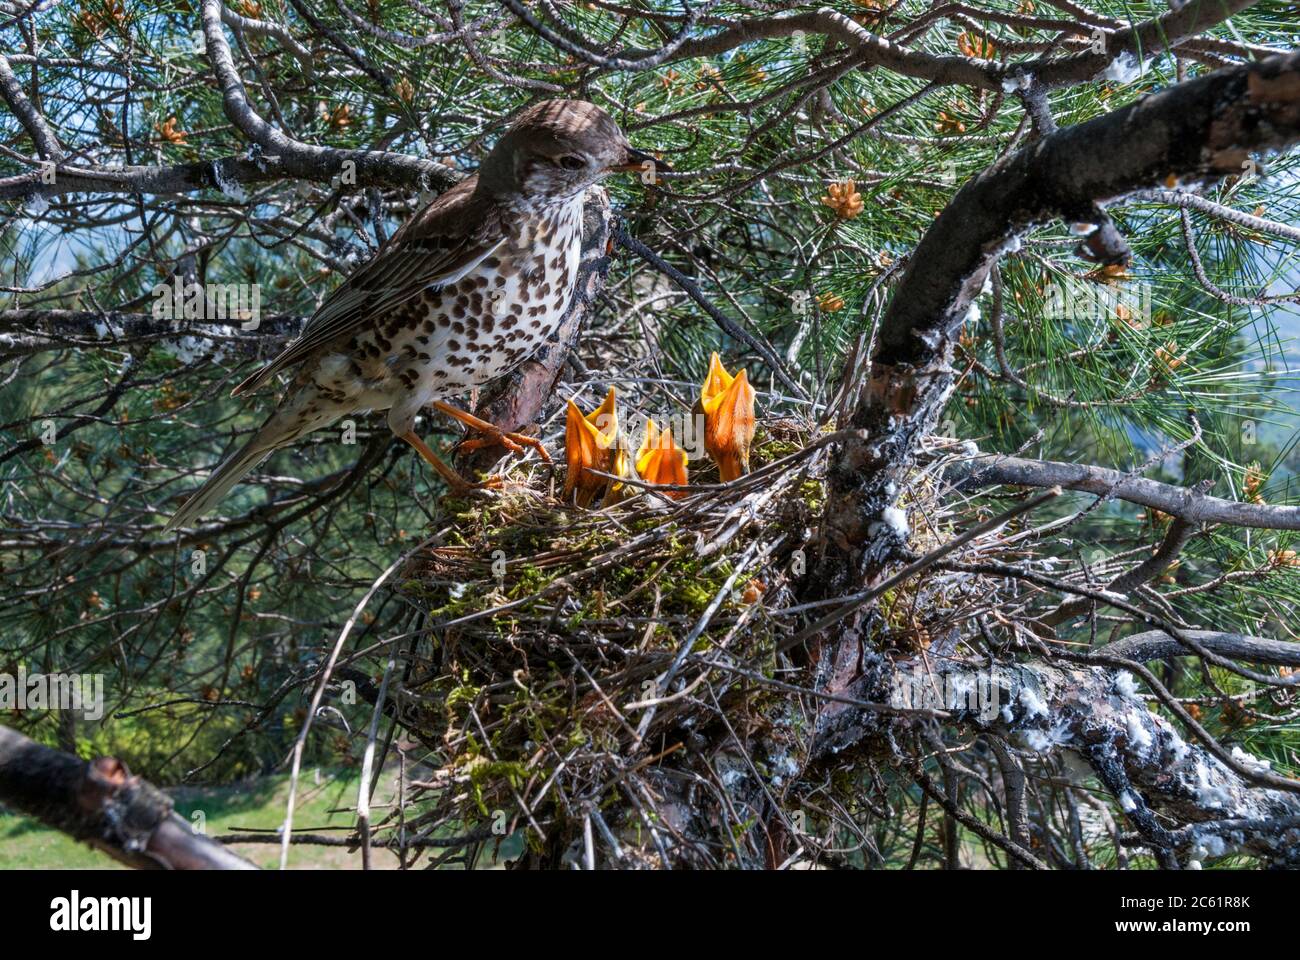 A mistle thrush (Turdus viscivorus) with four nestlings in the nest on a pine tree Stock Photo